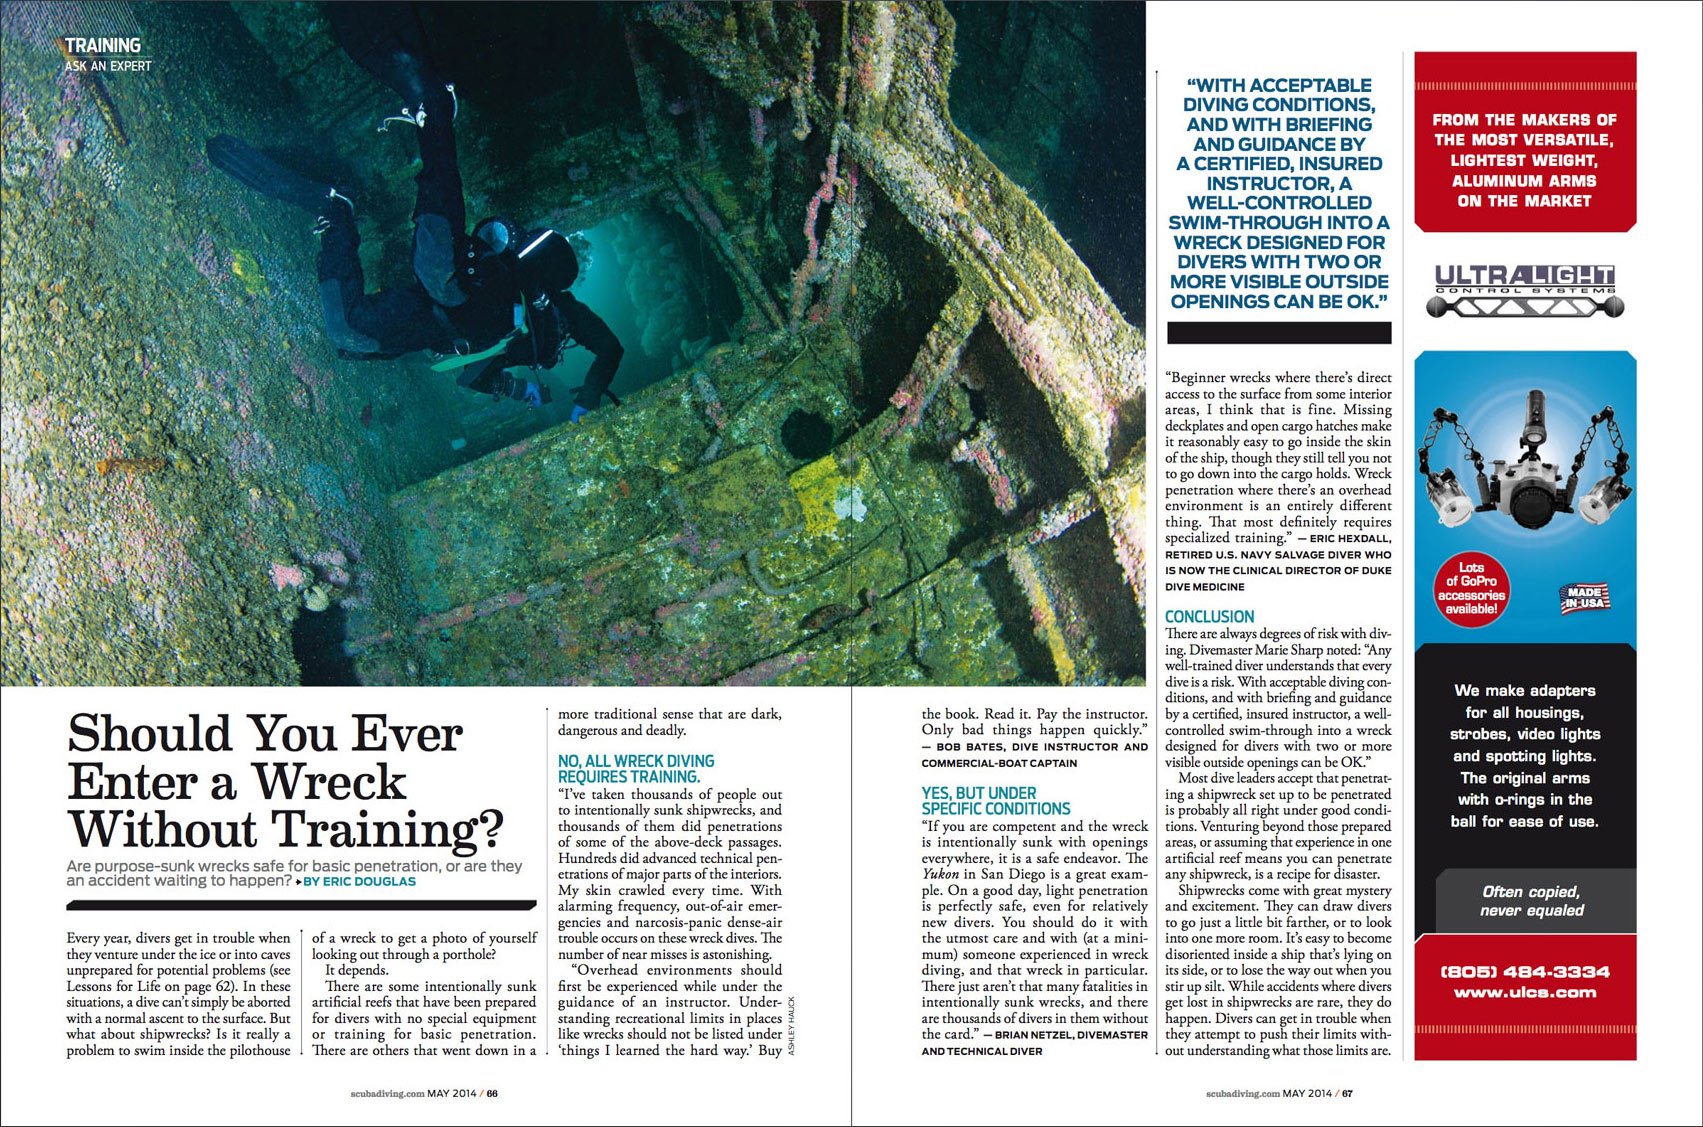 Photo of the HMCS Yukon (San Diego, California) in Scuba Diving Magazine by Ashley Hauck